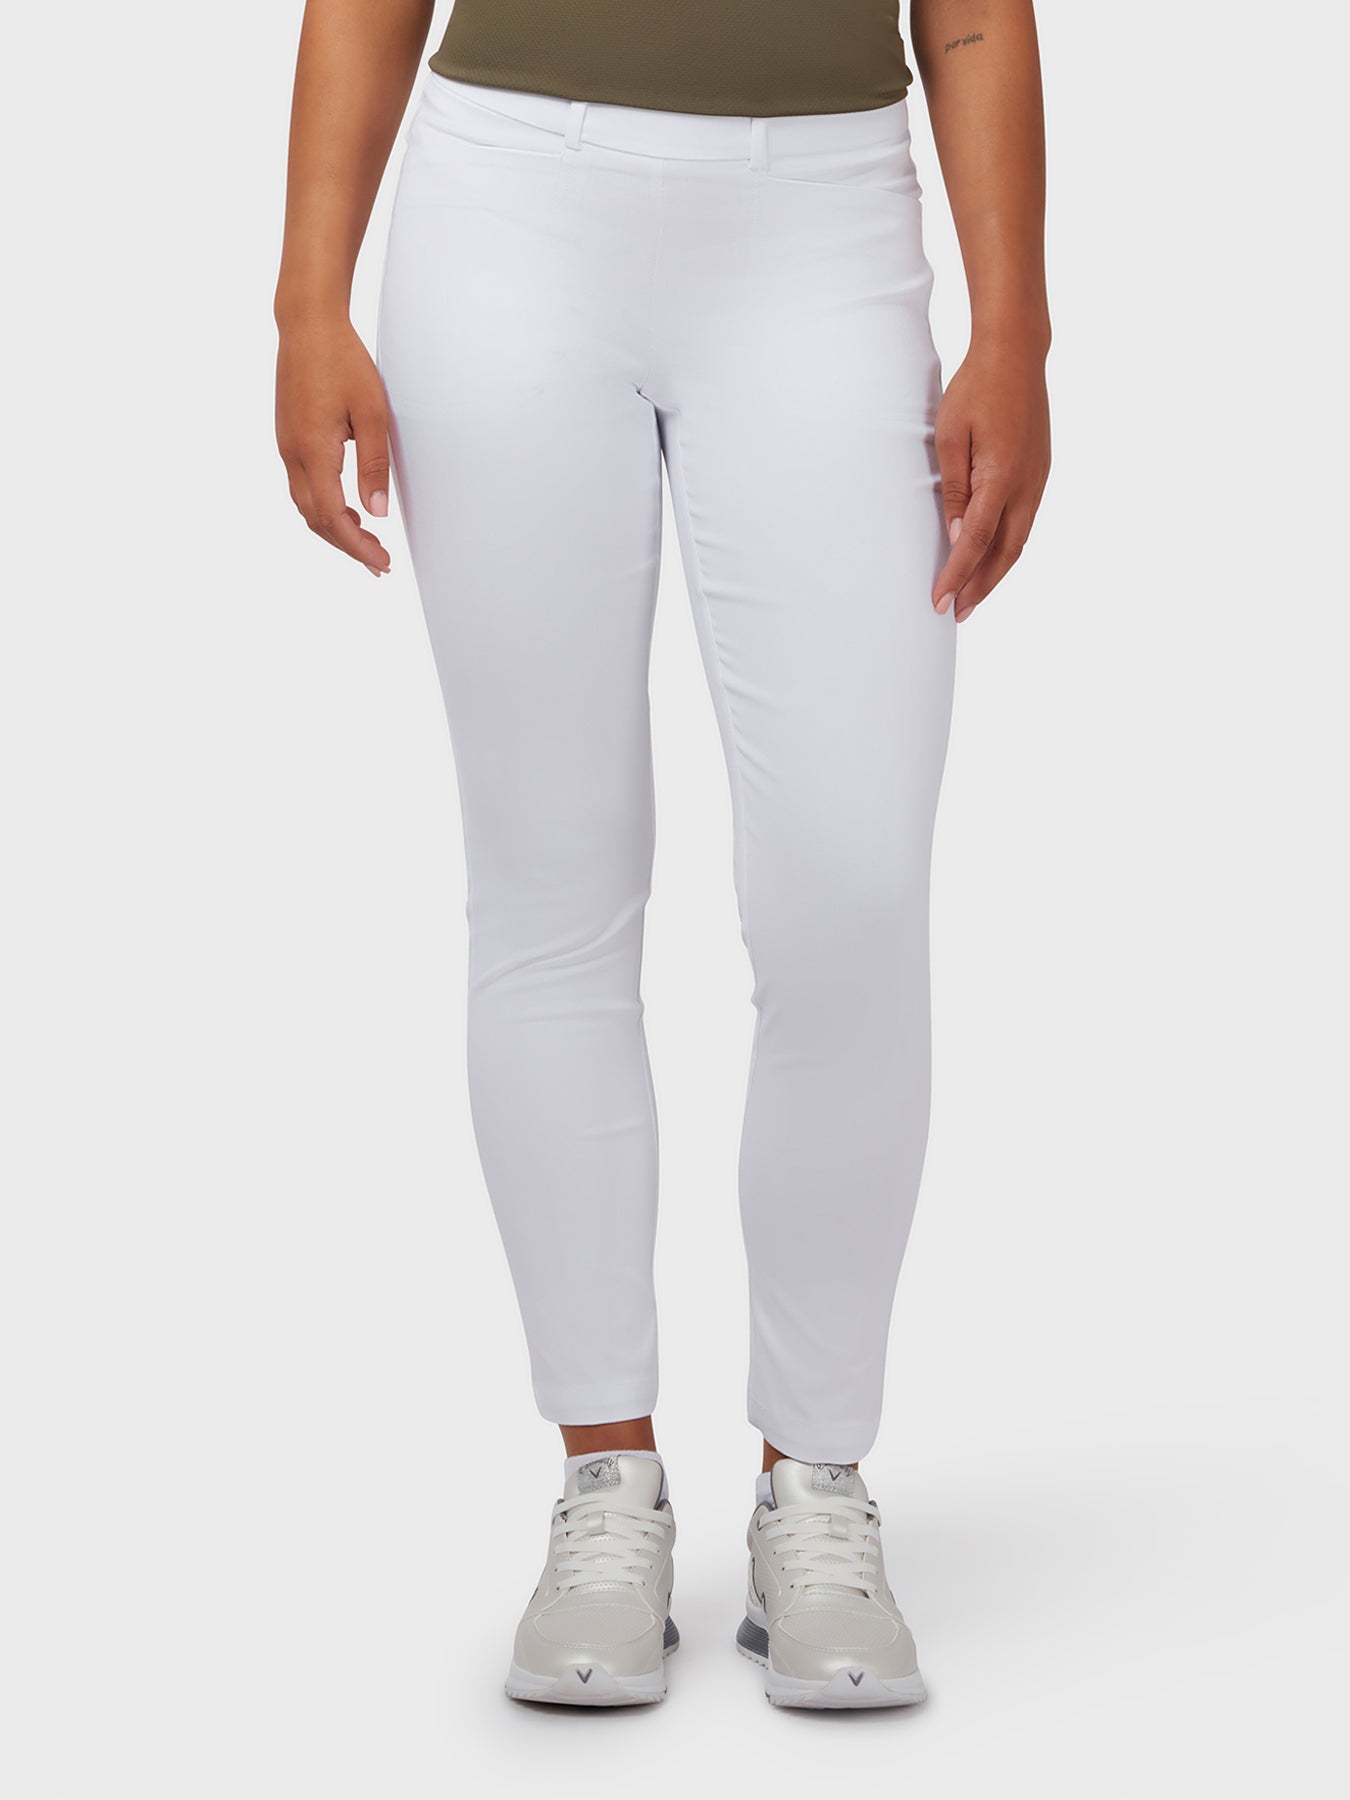 View Truesculpt Womens Trousers In Brilliant White information